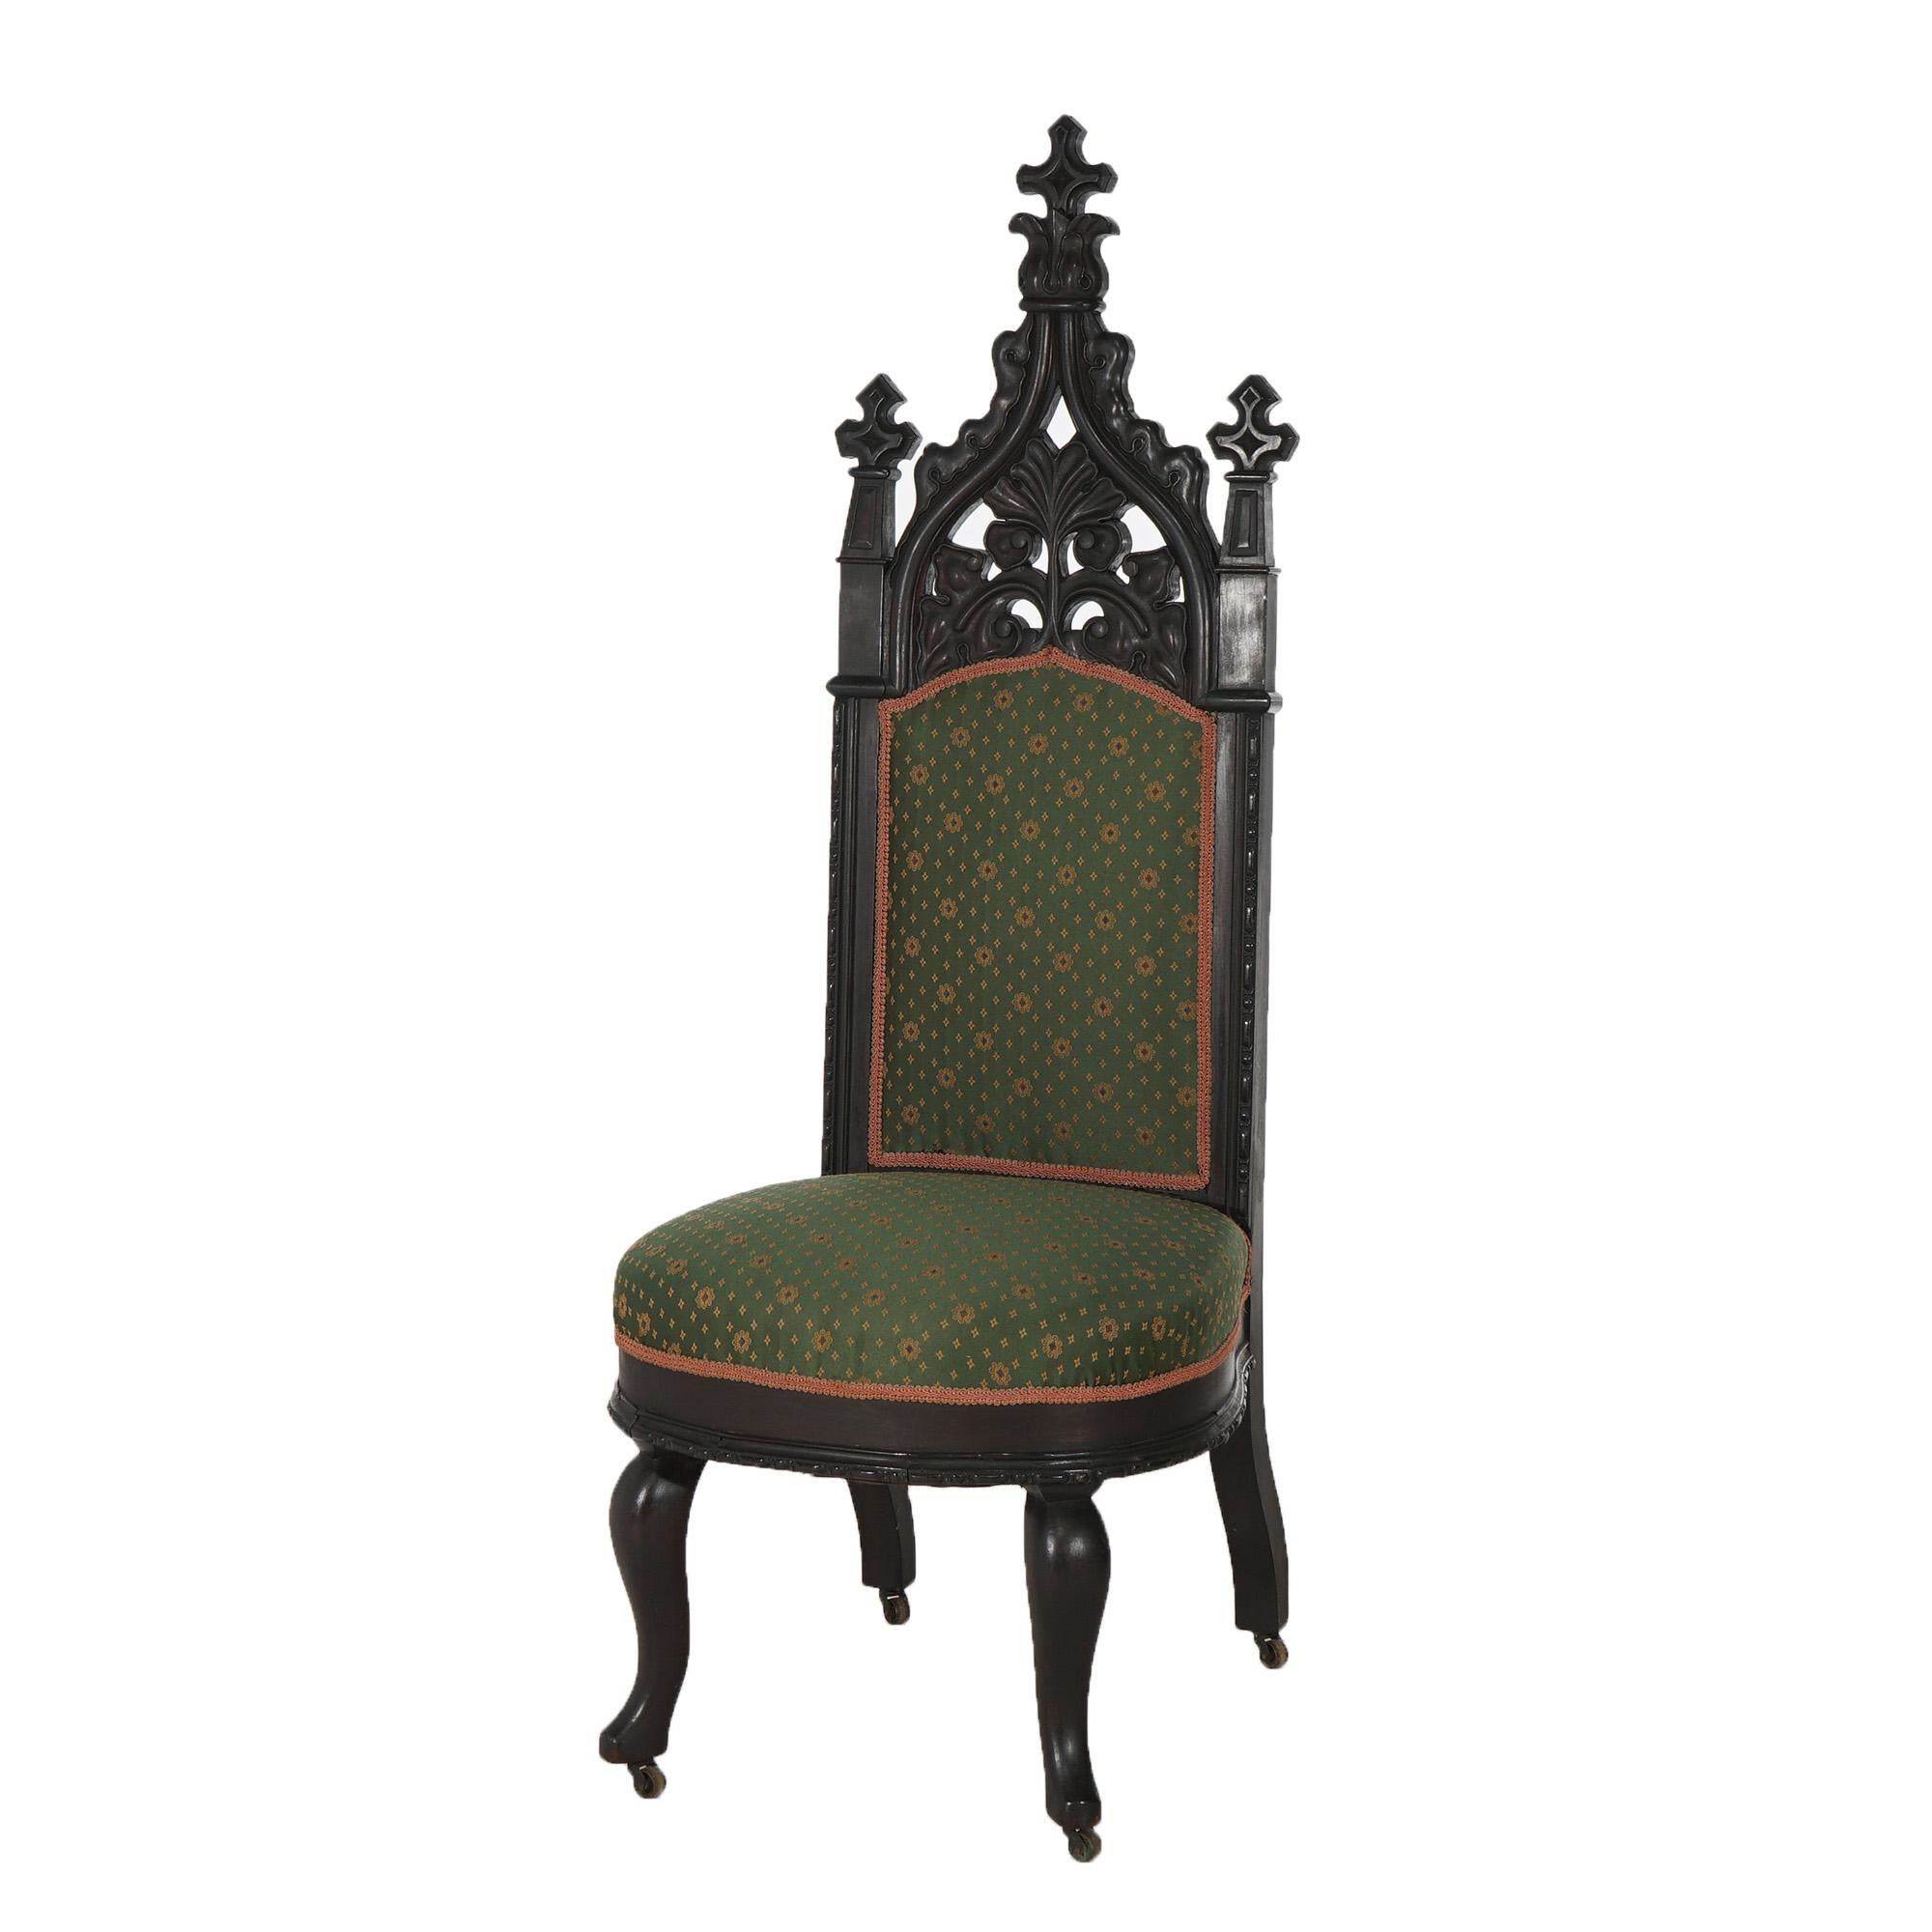 Antique Gothic Revival Ebonized & Carved Walnut Upholstered Throne Chair C1860 In Good Condition For Sale In Big Flats, NY